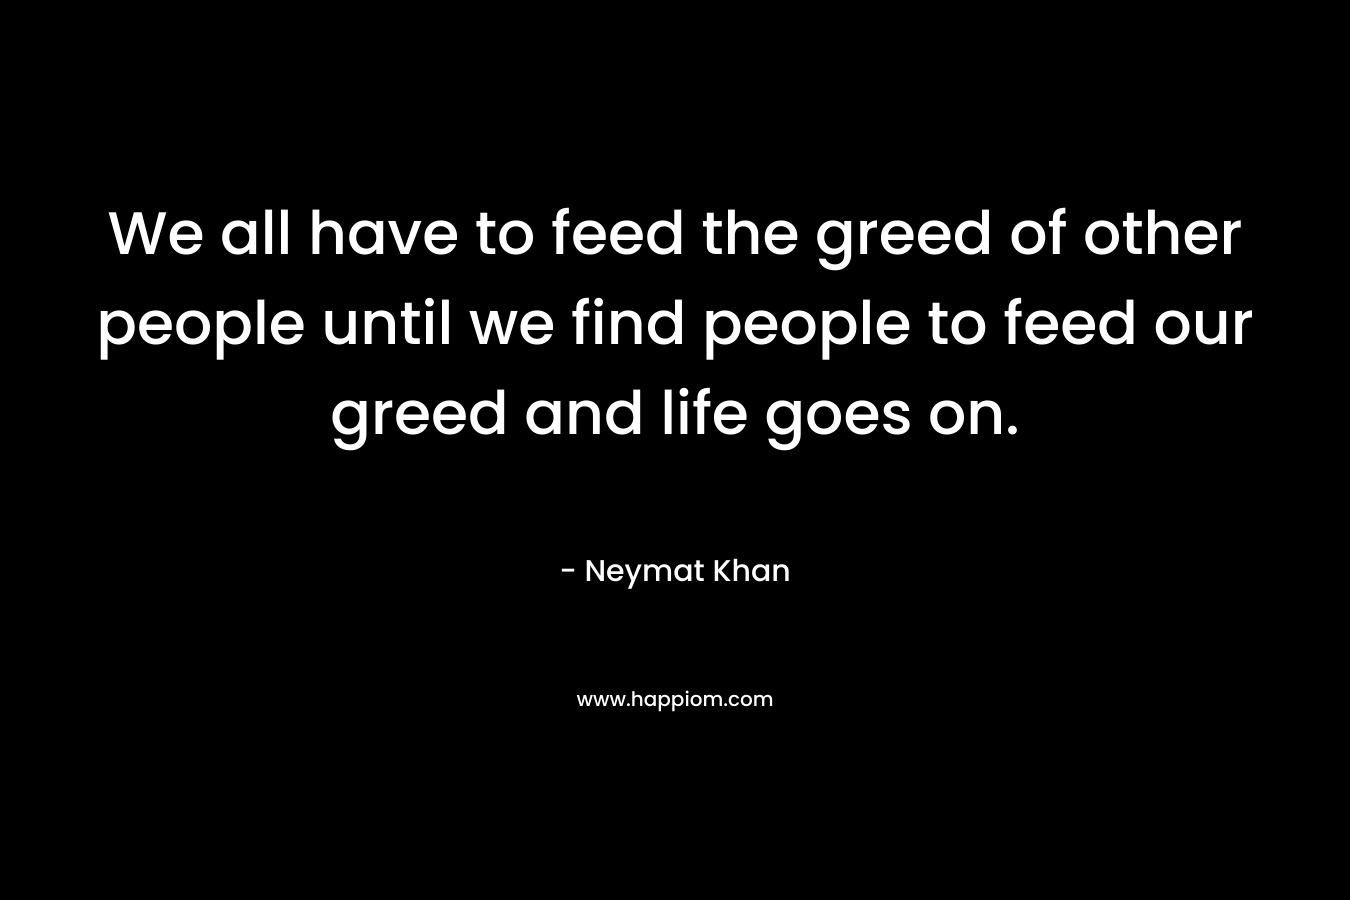 We all have to feed the greed of other people until we find people to feed our greed and life goes on.